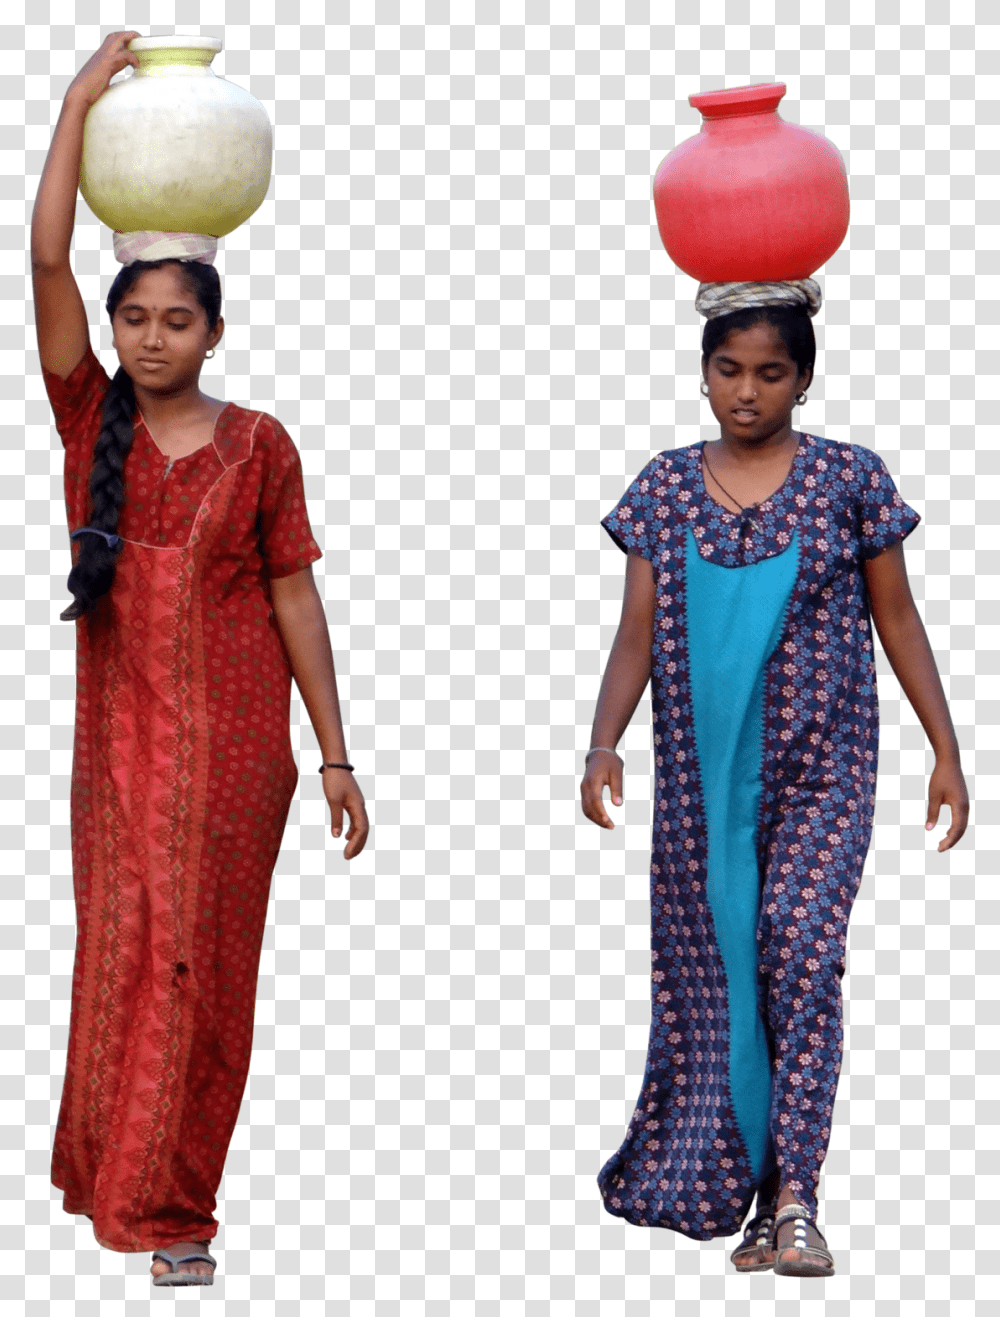 Indian People Walking Indian People, Person, Female, Dance Pose Transparent Png